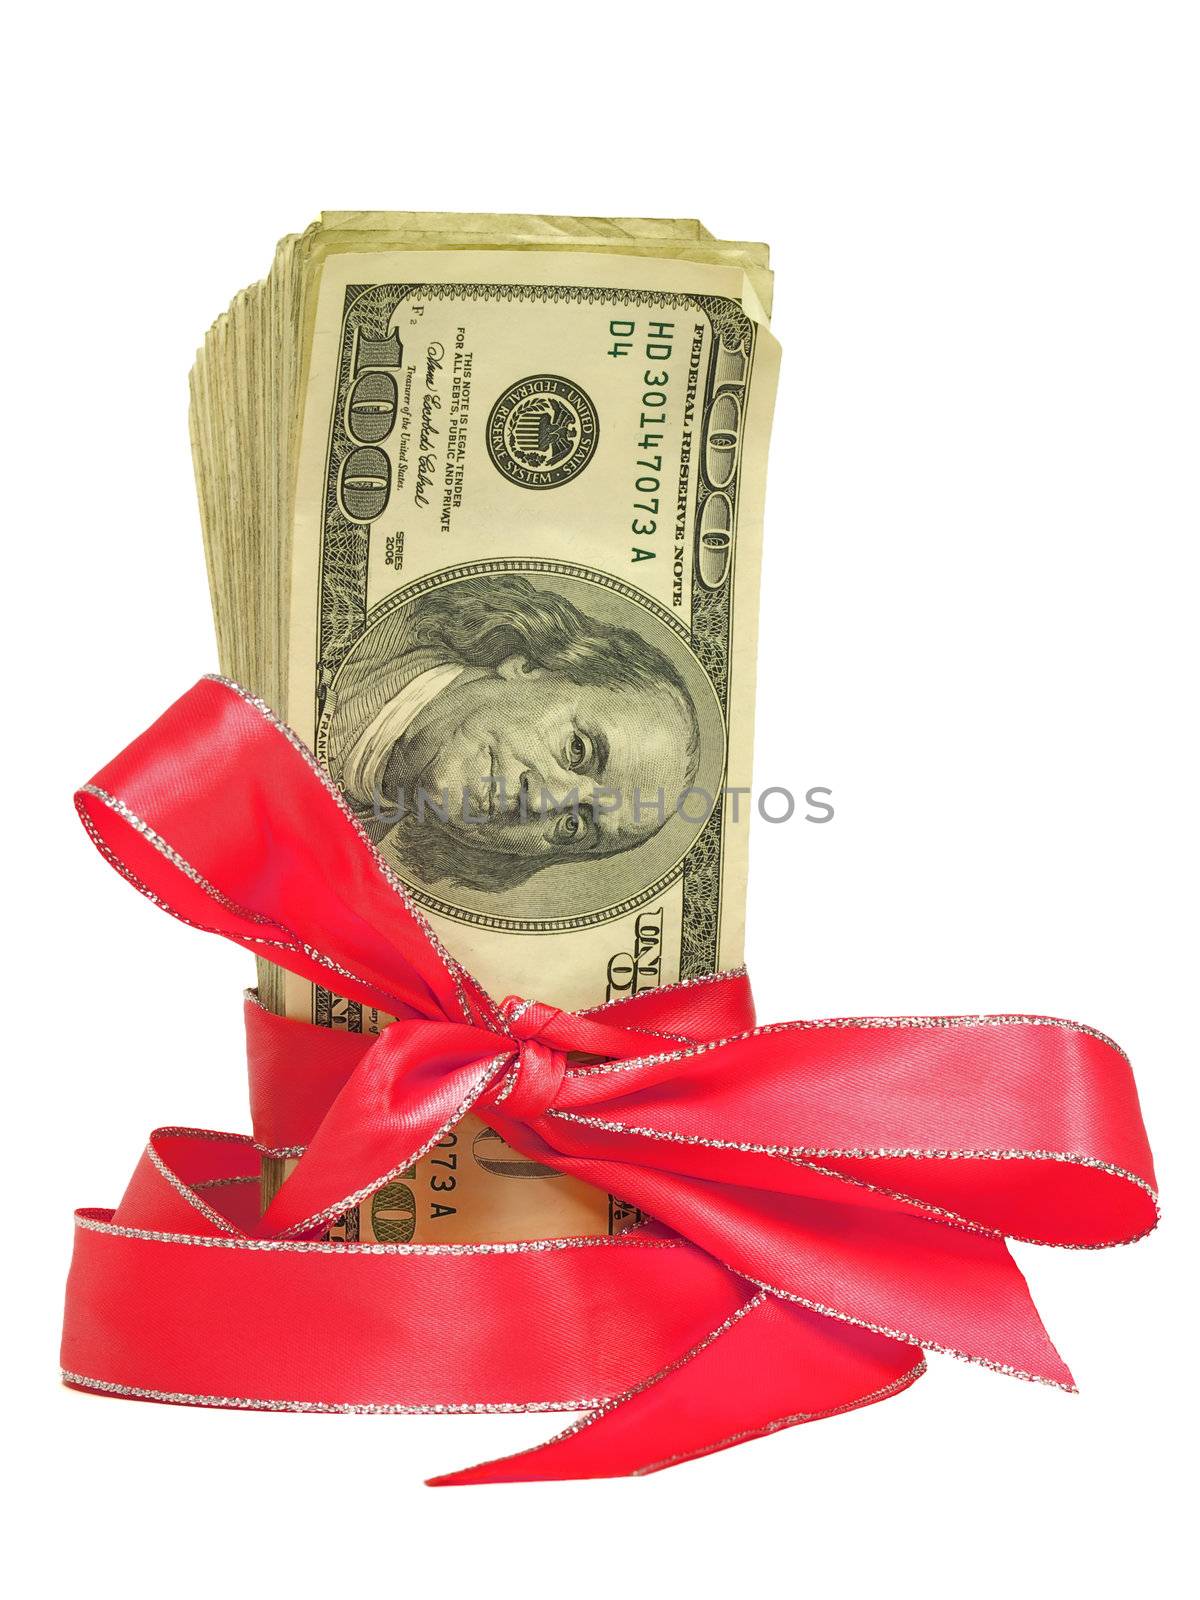 United States Currency Wrapped in a Red Ribbon as a Gift